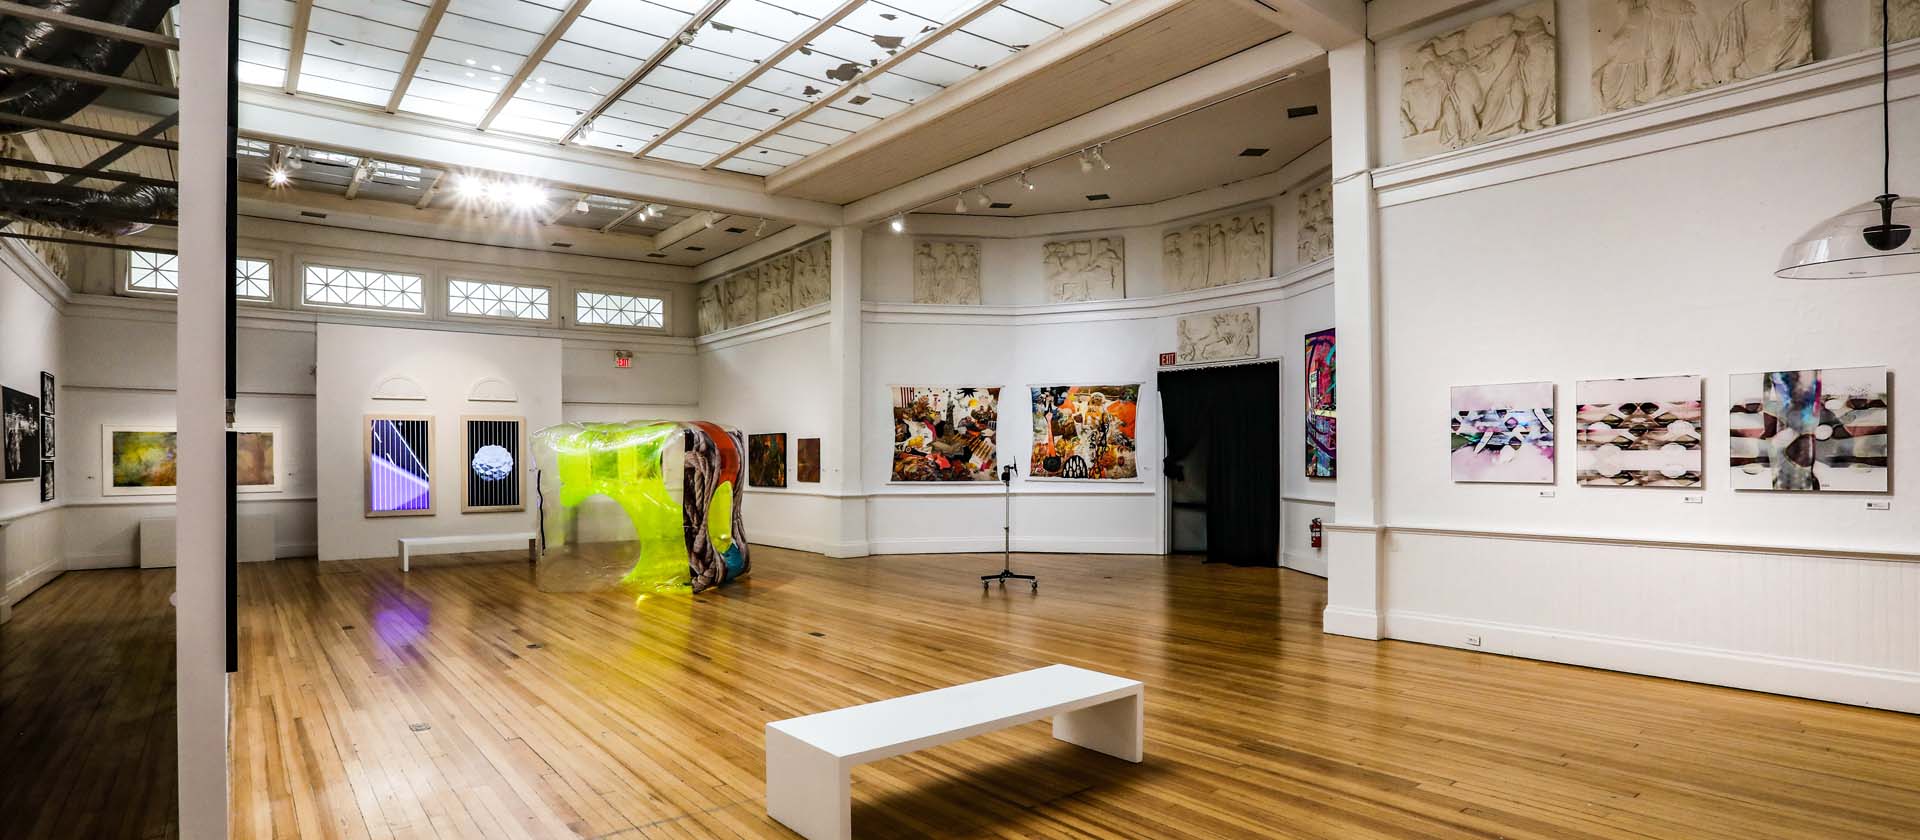 Installation view, Transept Gallery. Photo by Jeff Heatley/AAQ East End.